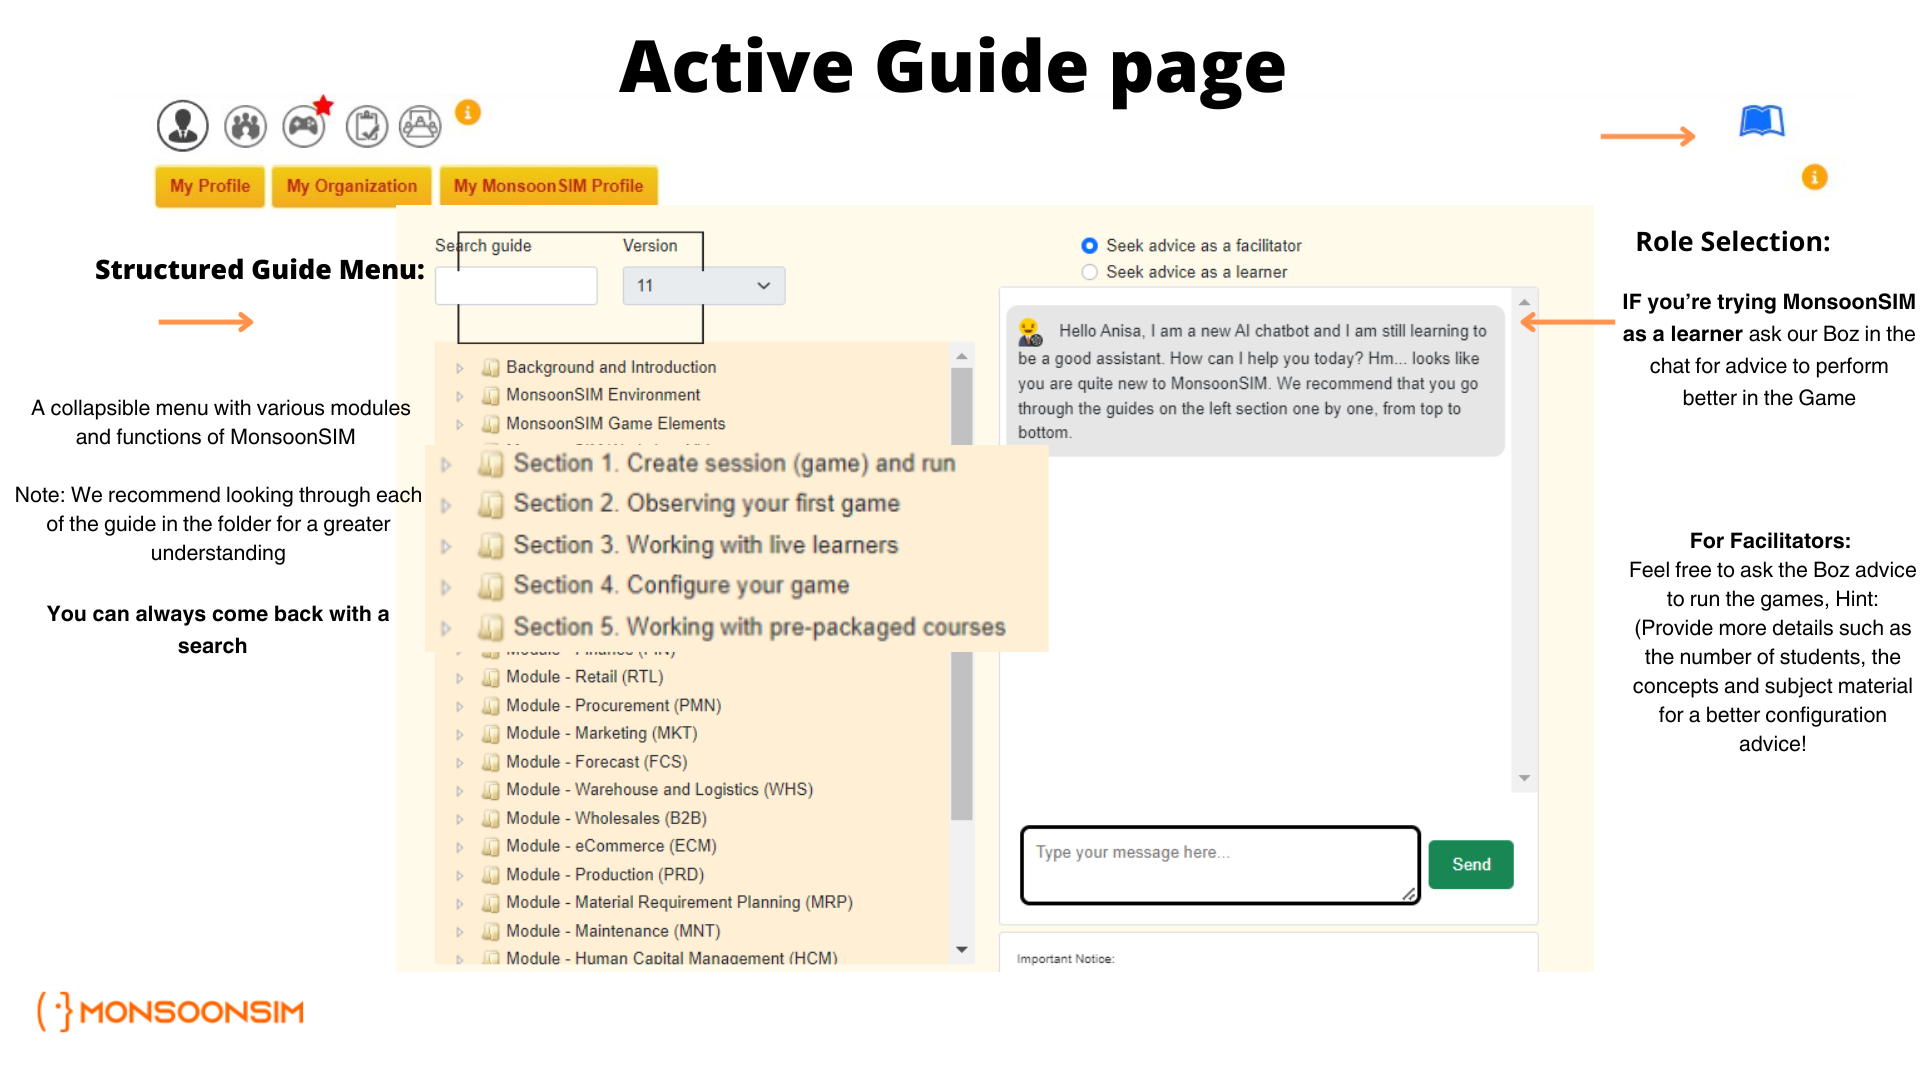 Screenshot of the Active Guide page in MonsoonSIM, featuring a collapsible menu with various modules and functions for facilitators and learners, and a chat window with Boz, the AI chatbot, offering assistance